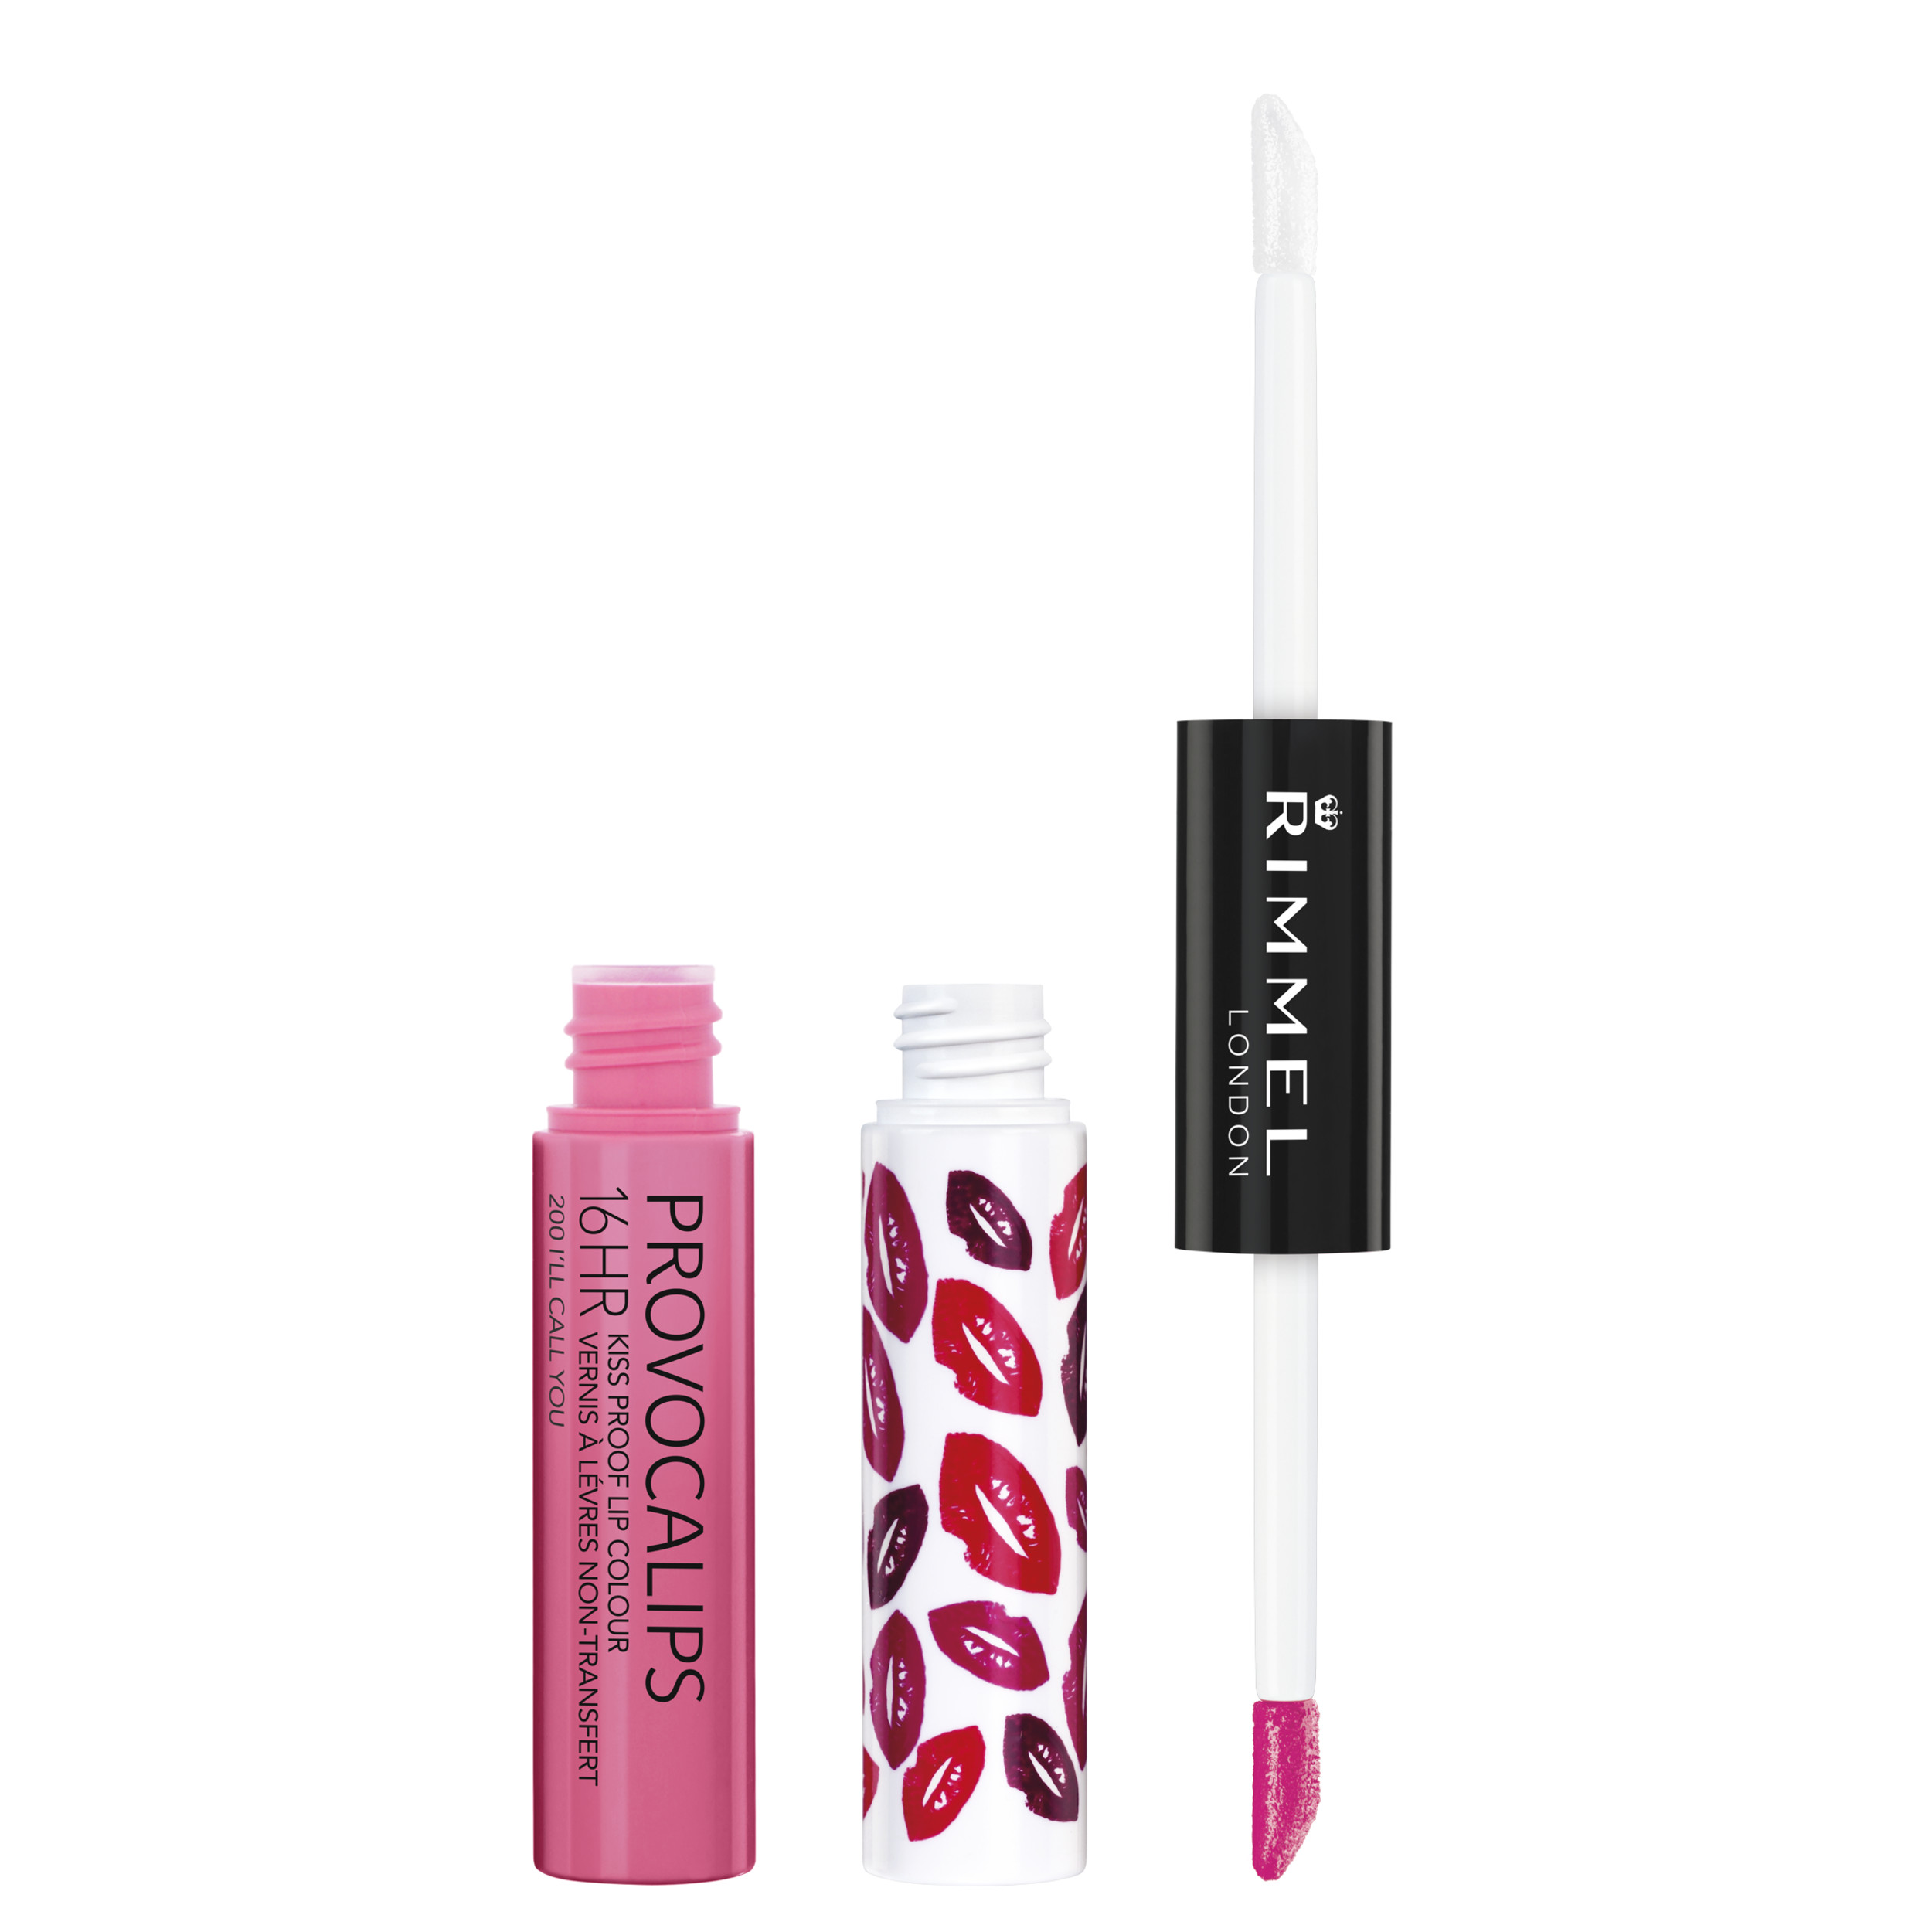 Rimmel London Provocalips 16HR Kiss Proof Lip Colour, I'll Call You, 0.14 oz - image 1 of 10